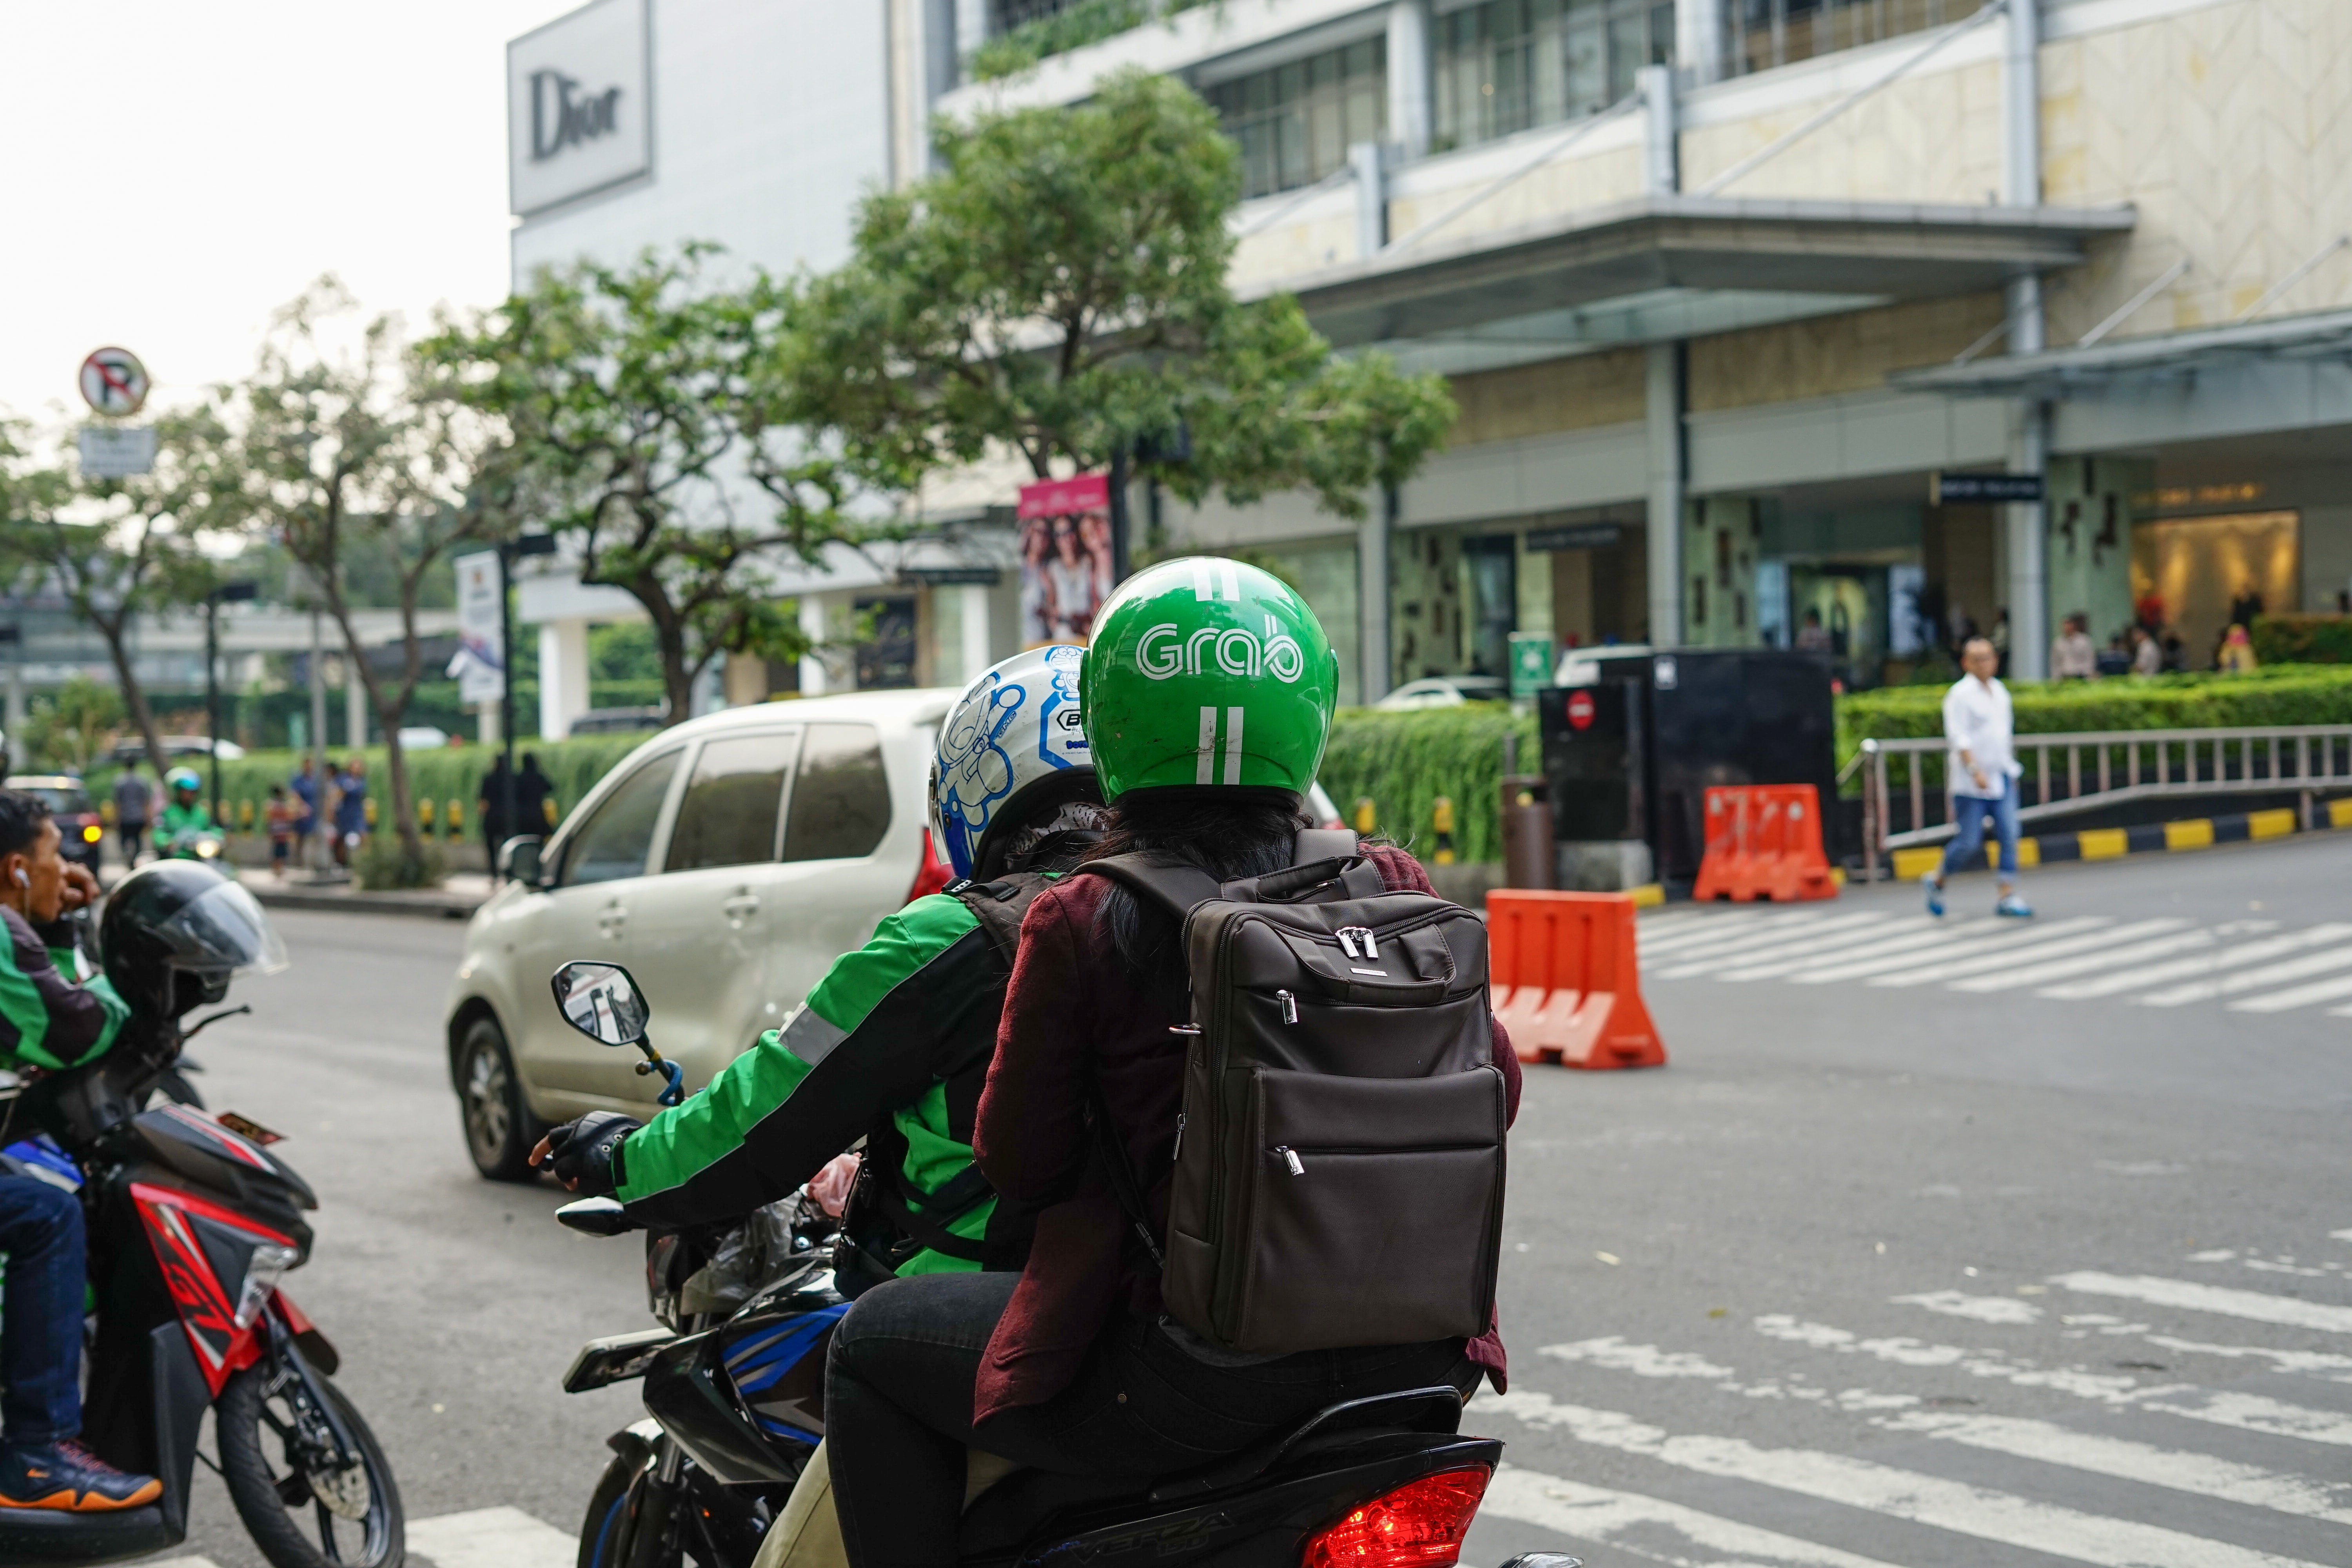 BeLive Technology pilots campaign with Grab to enable users to shop via live videos